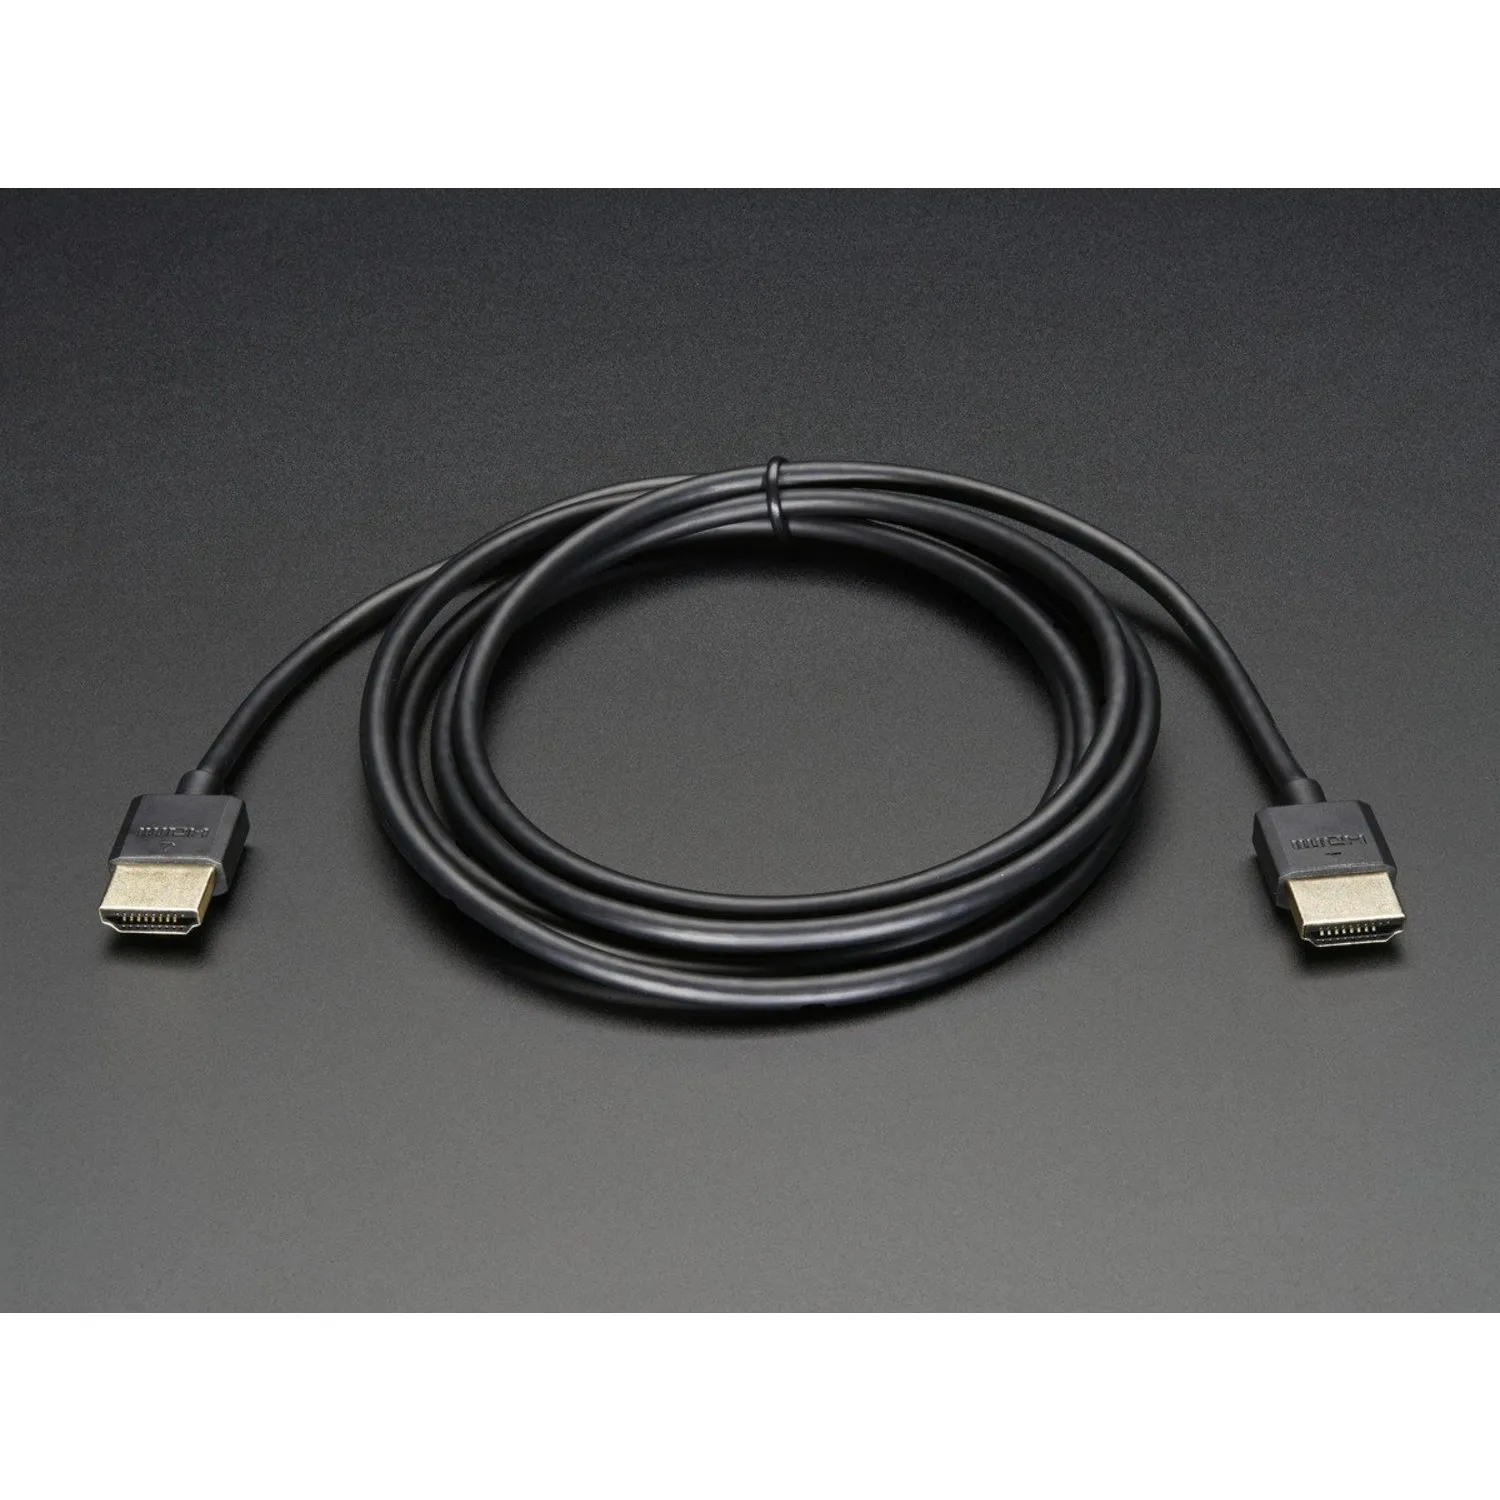 Photo of Slim HDMI Cable - 1820mm / 6 feet long